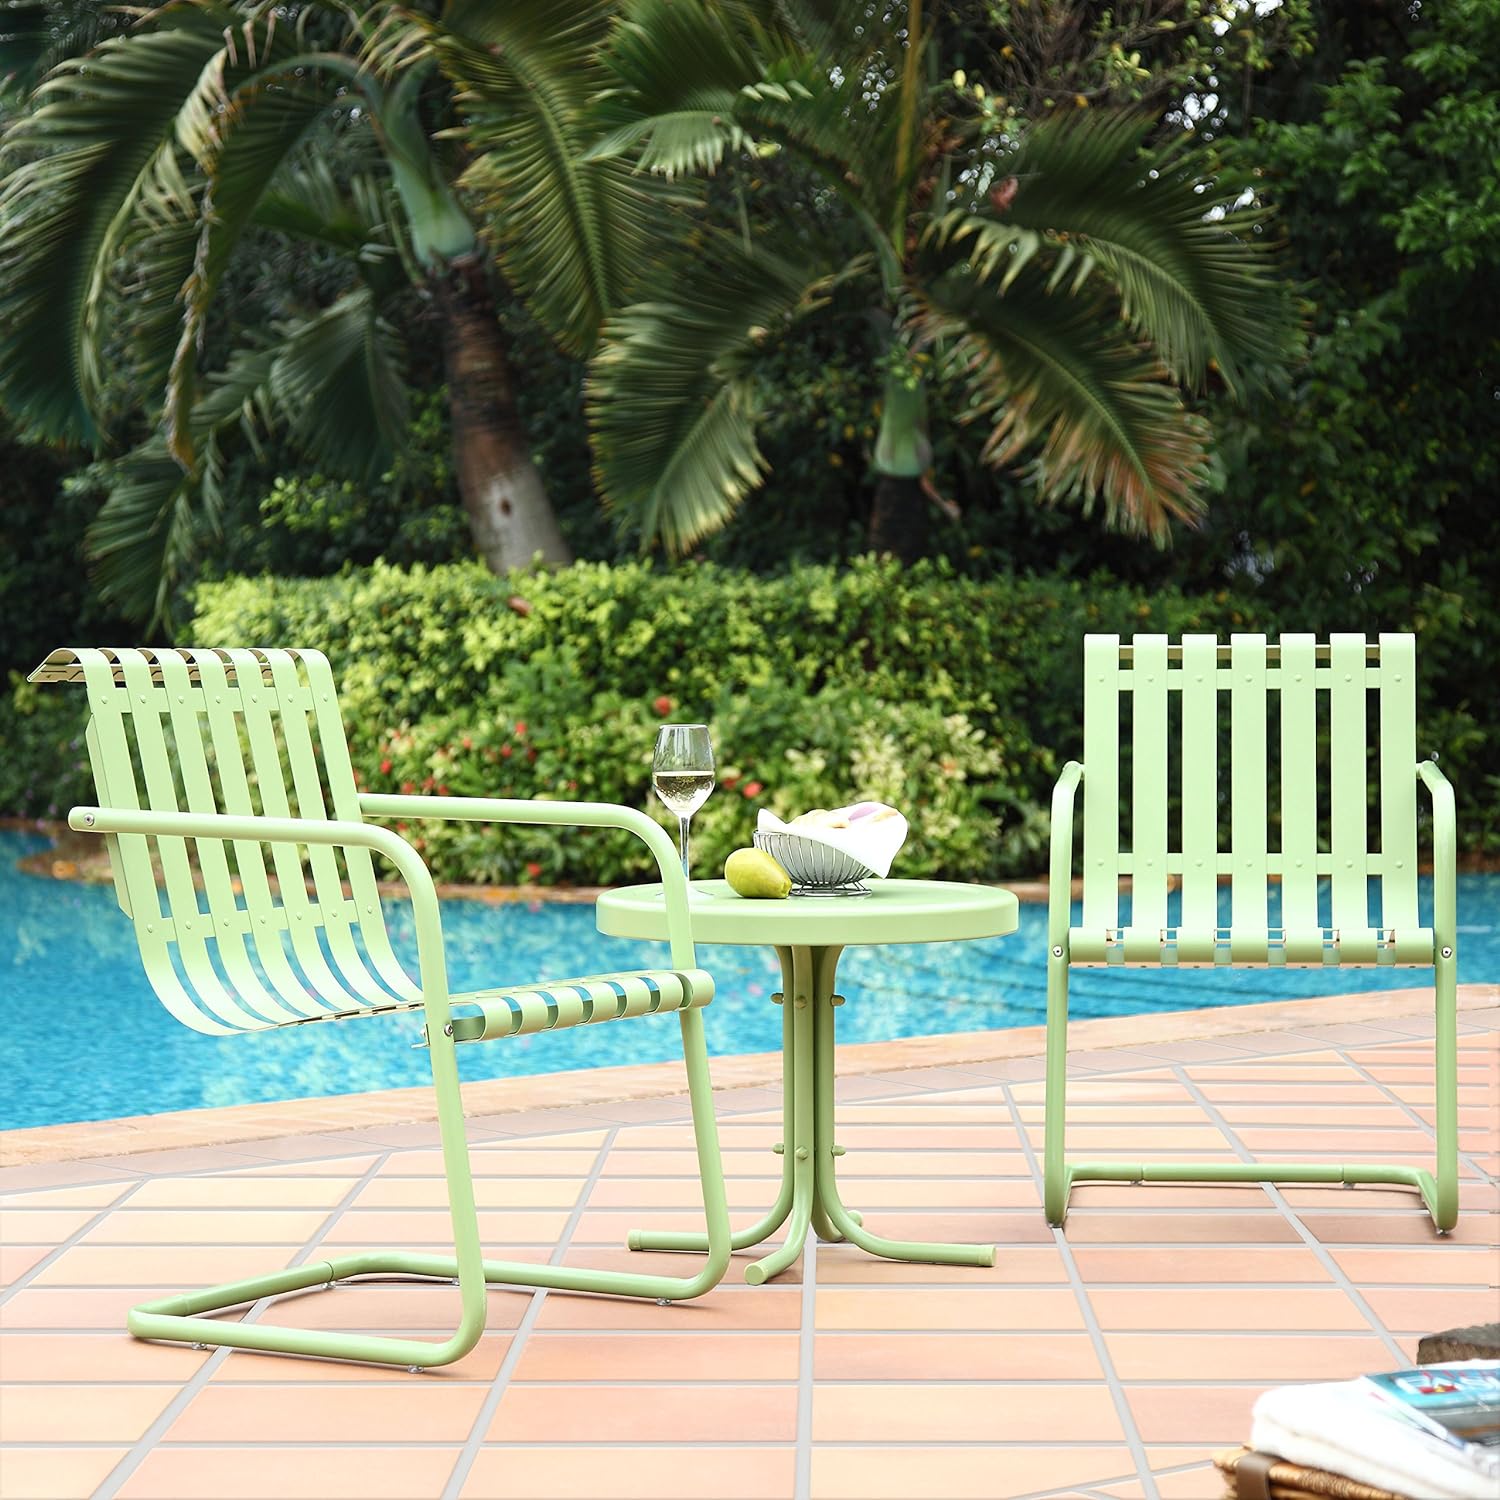 Crosley Furniture Gracie 3-Piece Retro Metal Outdoor Conversation Set with Side Table and 2 Chairs - Oasis Green